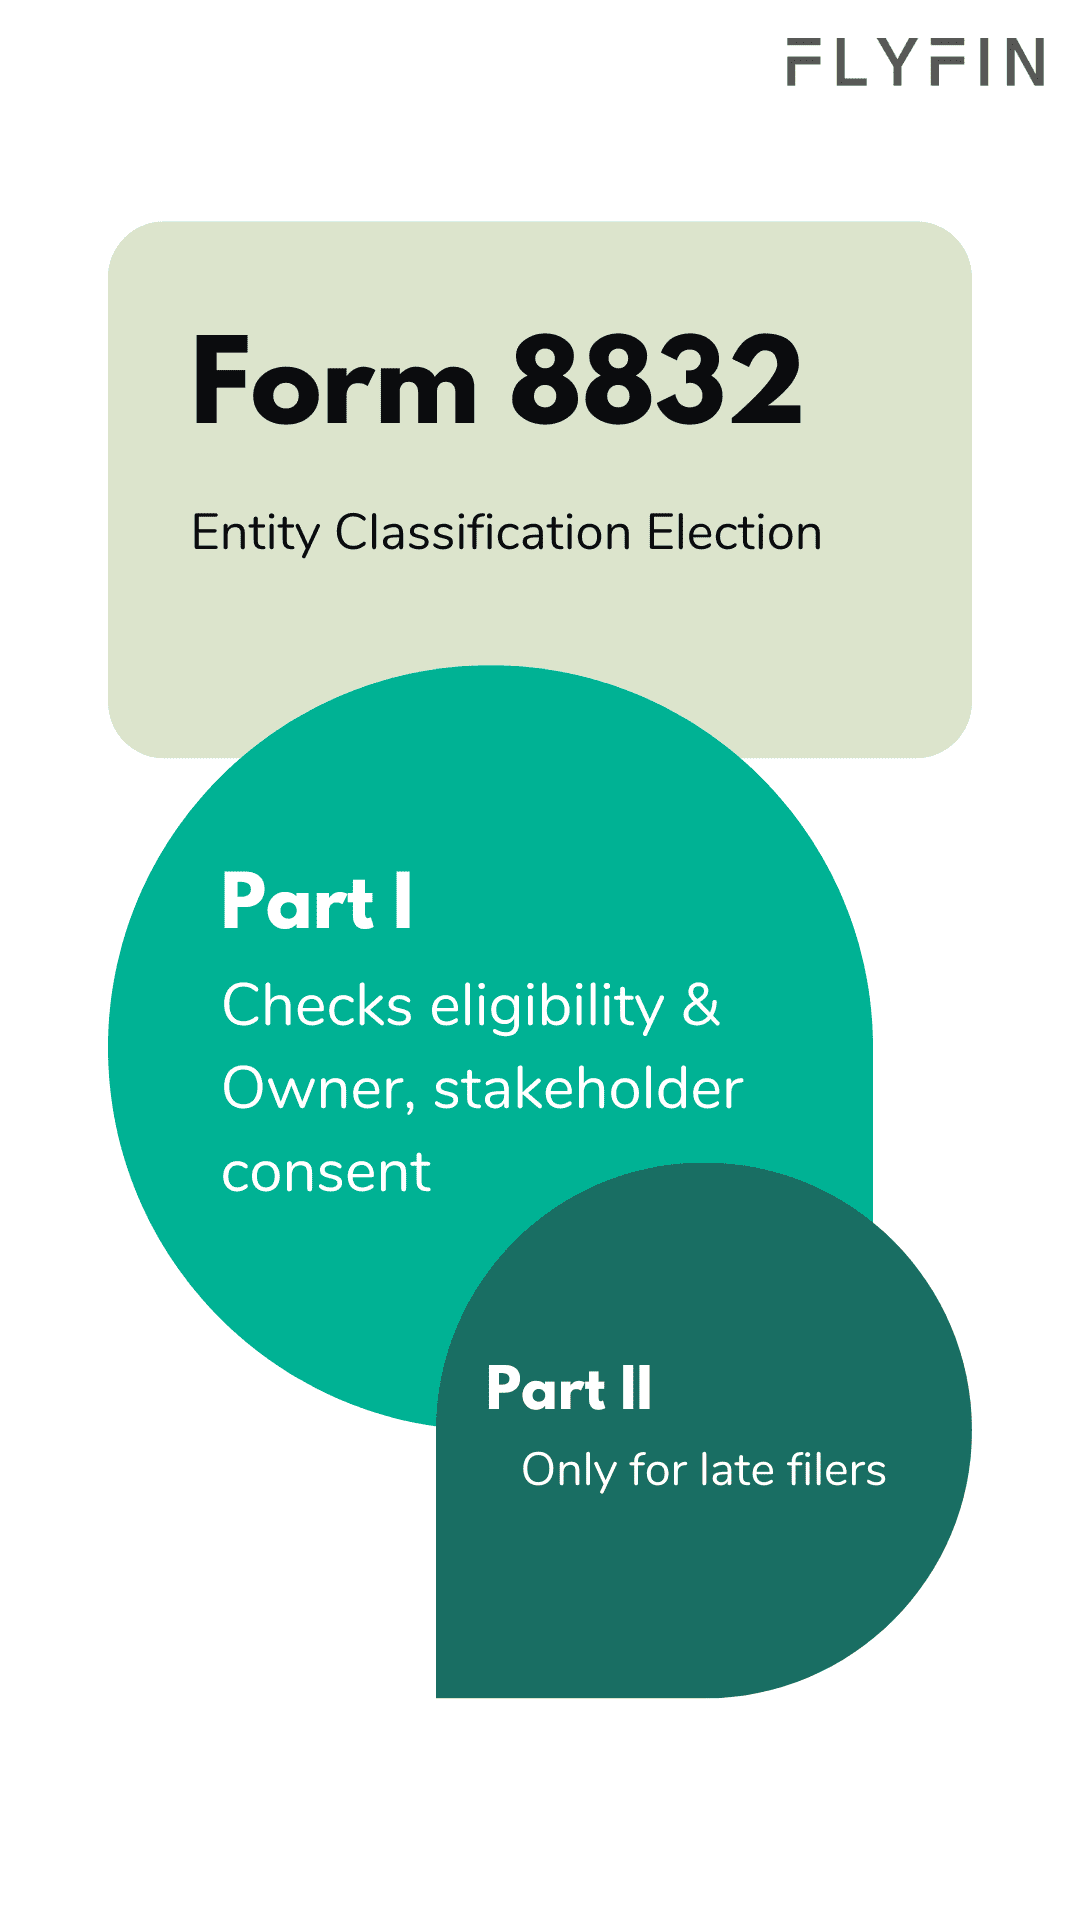 Image of Form 8832 for Entity Classification Election. Check eligibility & get owner consent. Part II only for late filers. Relevant for taxes, self-employed, 1099, and freelancers.